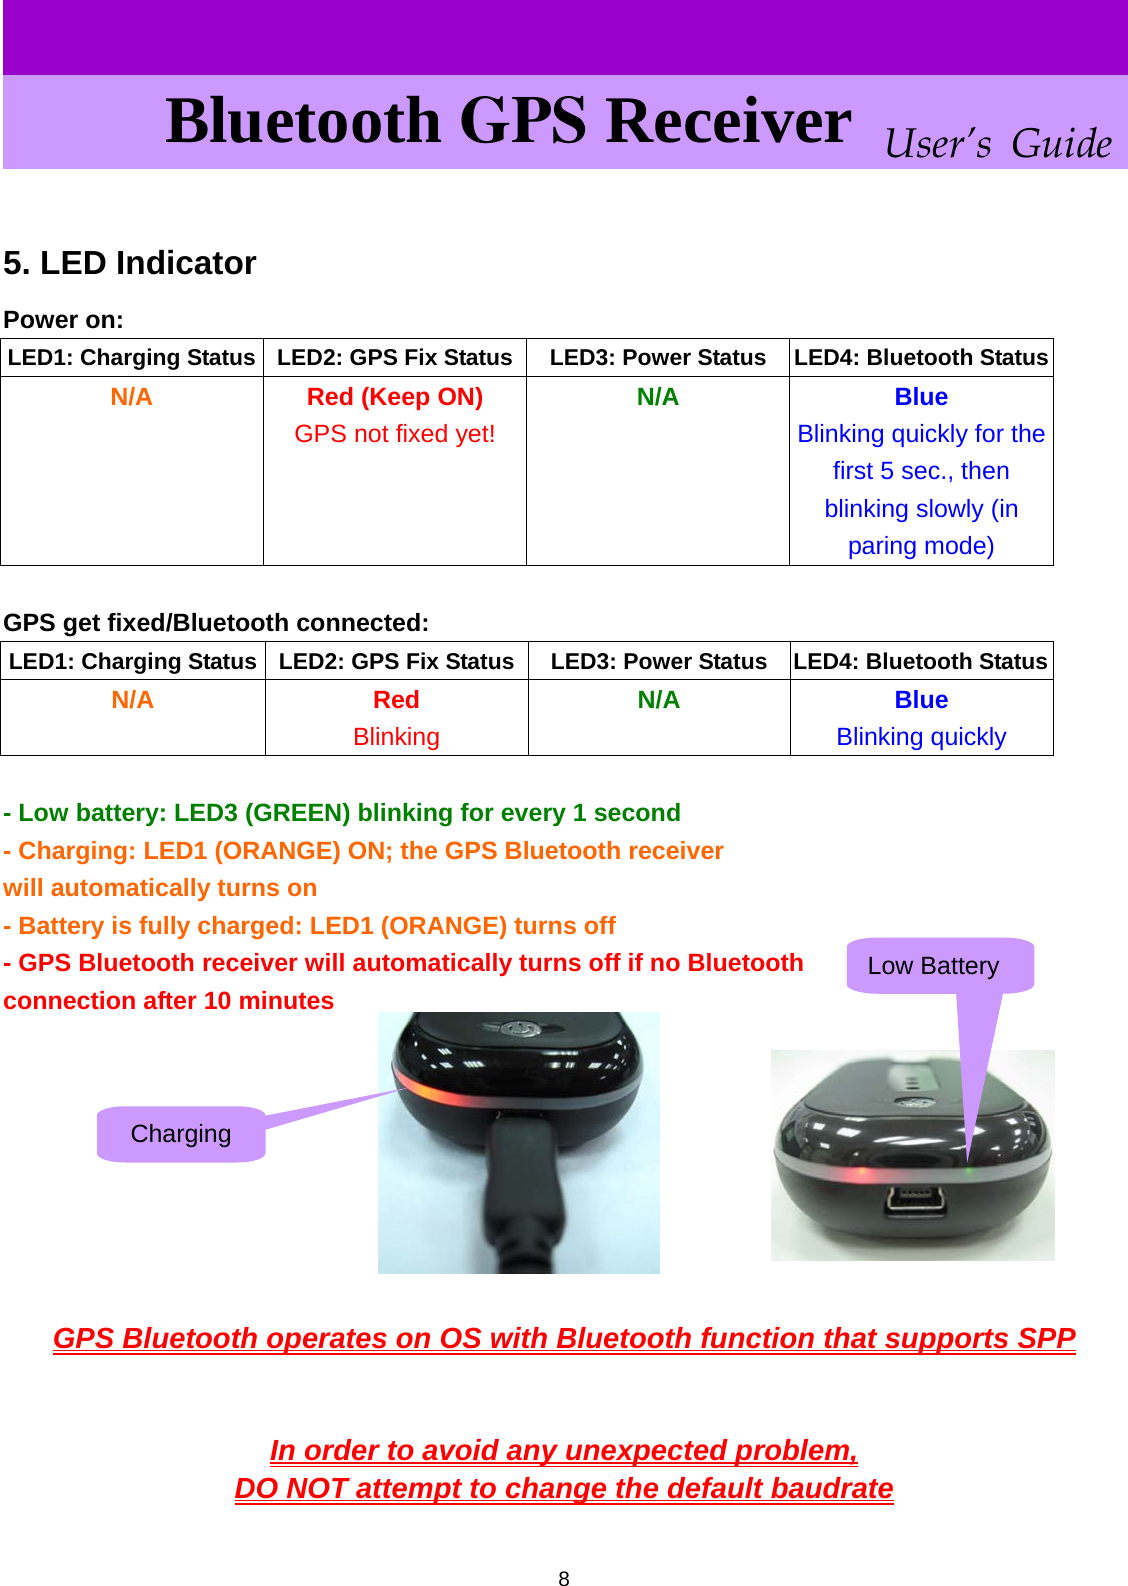      User’s GuideBluetooth GPS Receiver  5. LED Indicator Power on: LED1: Charging Status  LED2: GPS Fix Status  LED3: Power Status  LED4: Bluetooth StatusN/A  Red (Keep ON)  N/A  Blue GPS not fixed yet! Blinking quickly for the first 5 sec., then blinking slowly (in paring mode)  GPS get fixed/Bluetooth connected: LED1: Charging Status  LED2: GPS Fix Status  LED3: Power Status  LED4: Bluetooth StatusN/A Red N/A  Blue Blinking Blinking quickly  - Low battery: LED3 (GREEN) blinking for every 1 second - Charging: LED1 (ORANGE) ON; the GPS Bluetooth receiver will automatically turns on - Battery is fully charged: LED1 (ORANGE) turns off - GPS Bluetooth receiver will automatically turns off if no Bluetooth  Low Battery connection after 10 minutes Charging         GPS Bluetooth operates on OS with Bluetooth function that supports SPP   In order to avoid any unexpected problem, DO NOT attempt to change the default baudrate   8